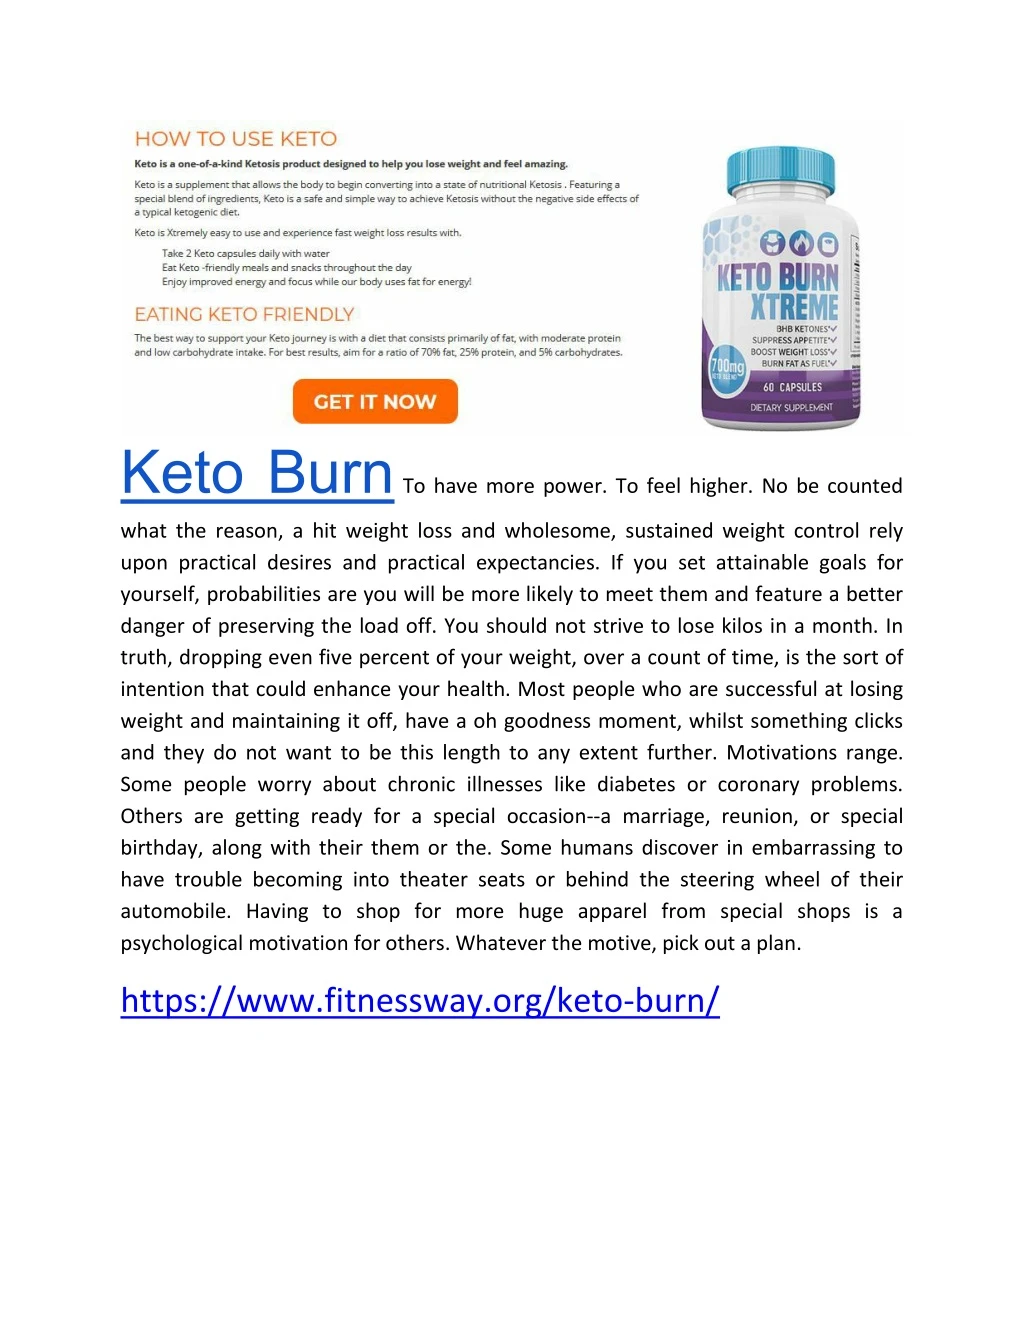 keto burn to have more power to feel higher